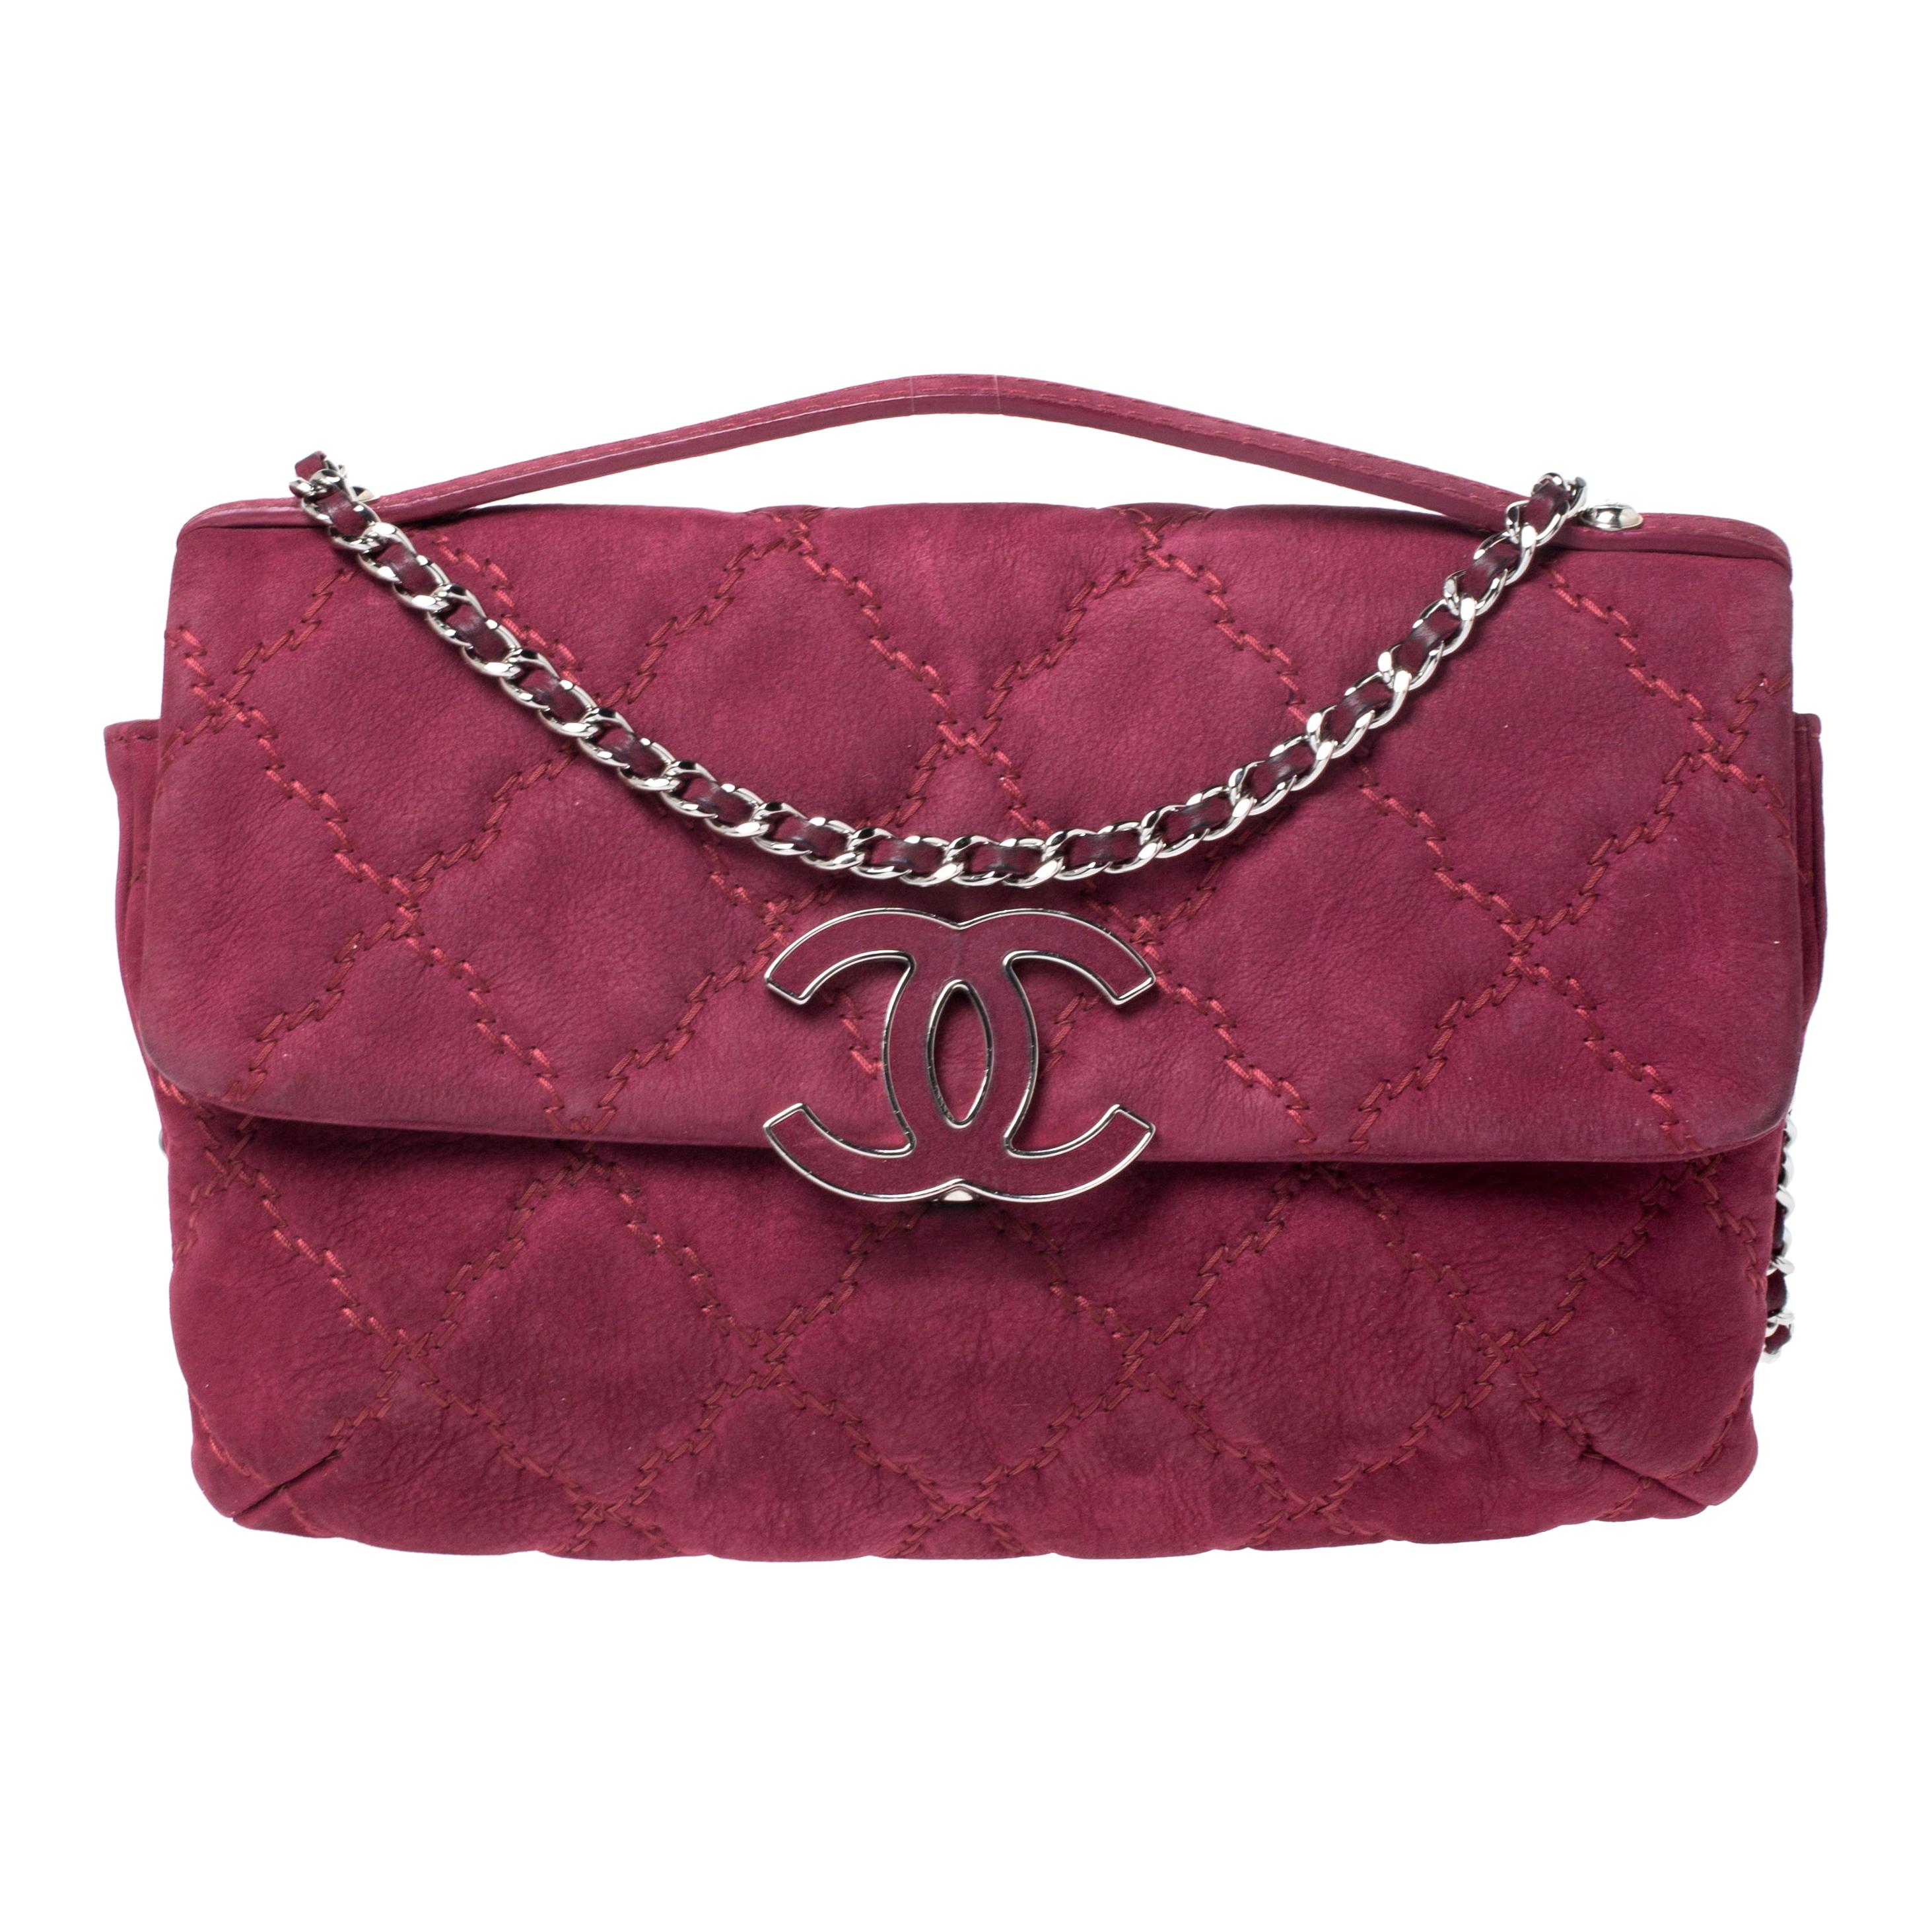 Chanel Burgundy Stitch Quilted Leather CC Clasp Flap Bag